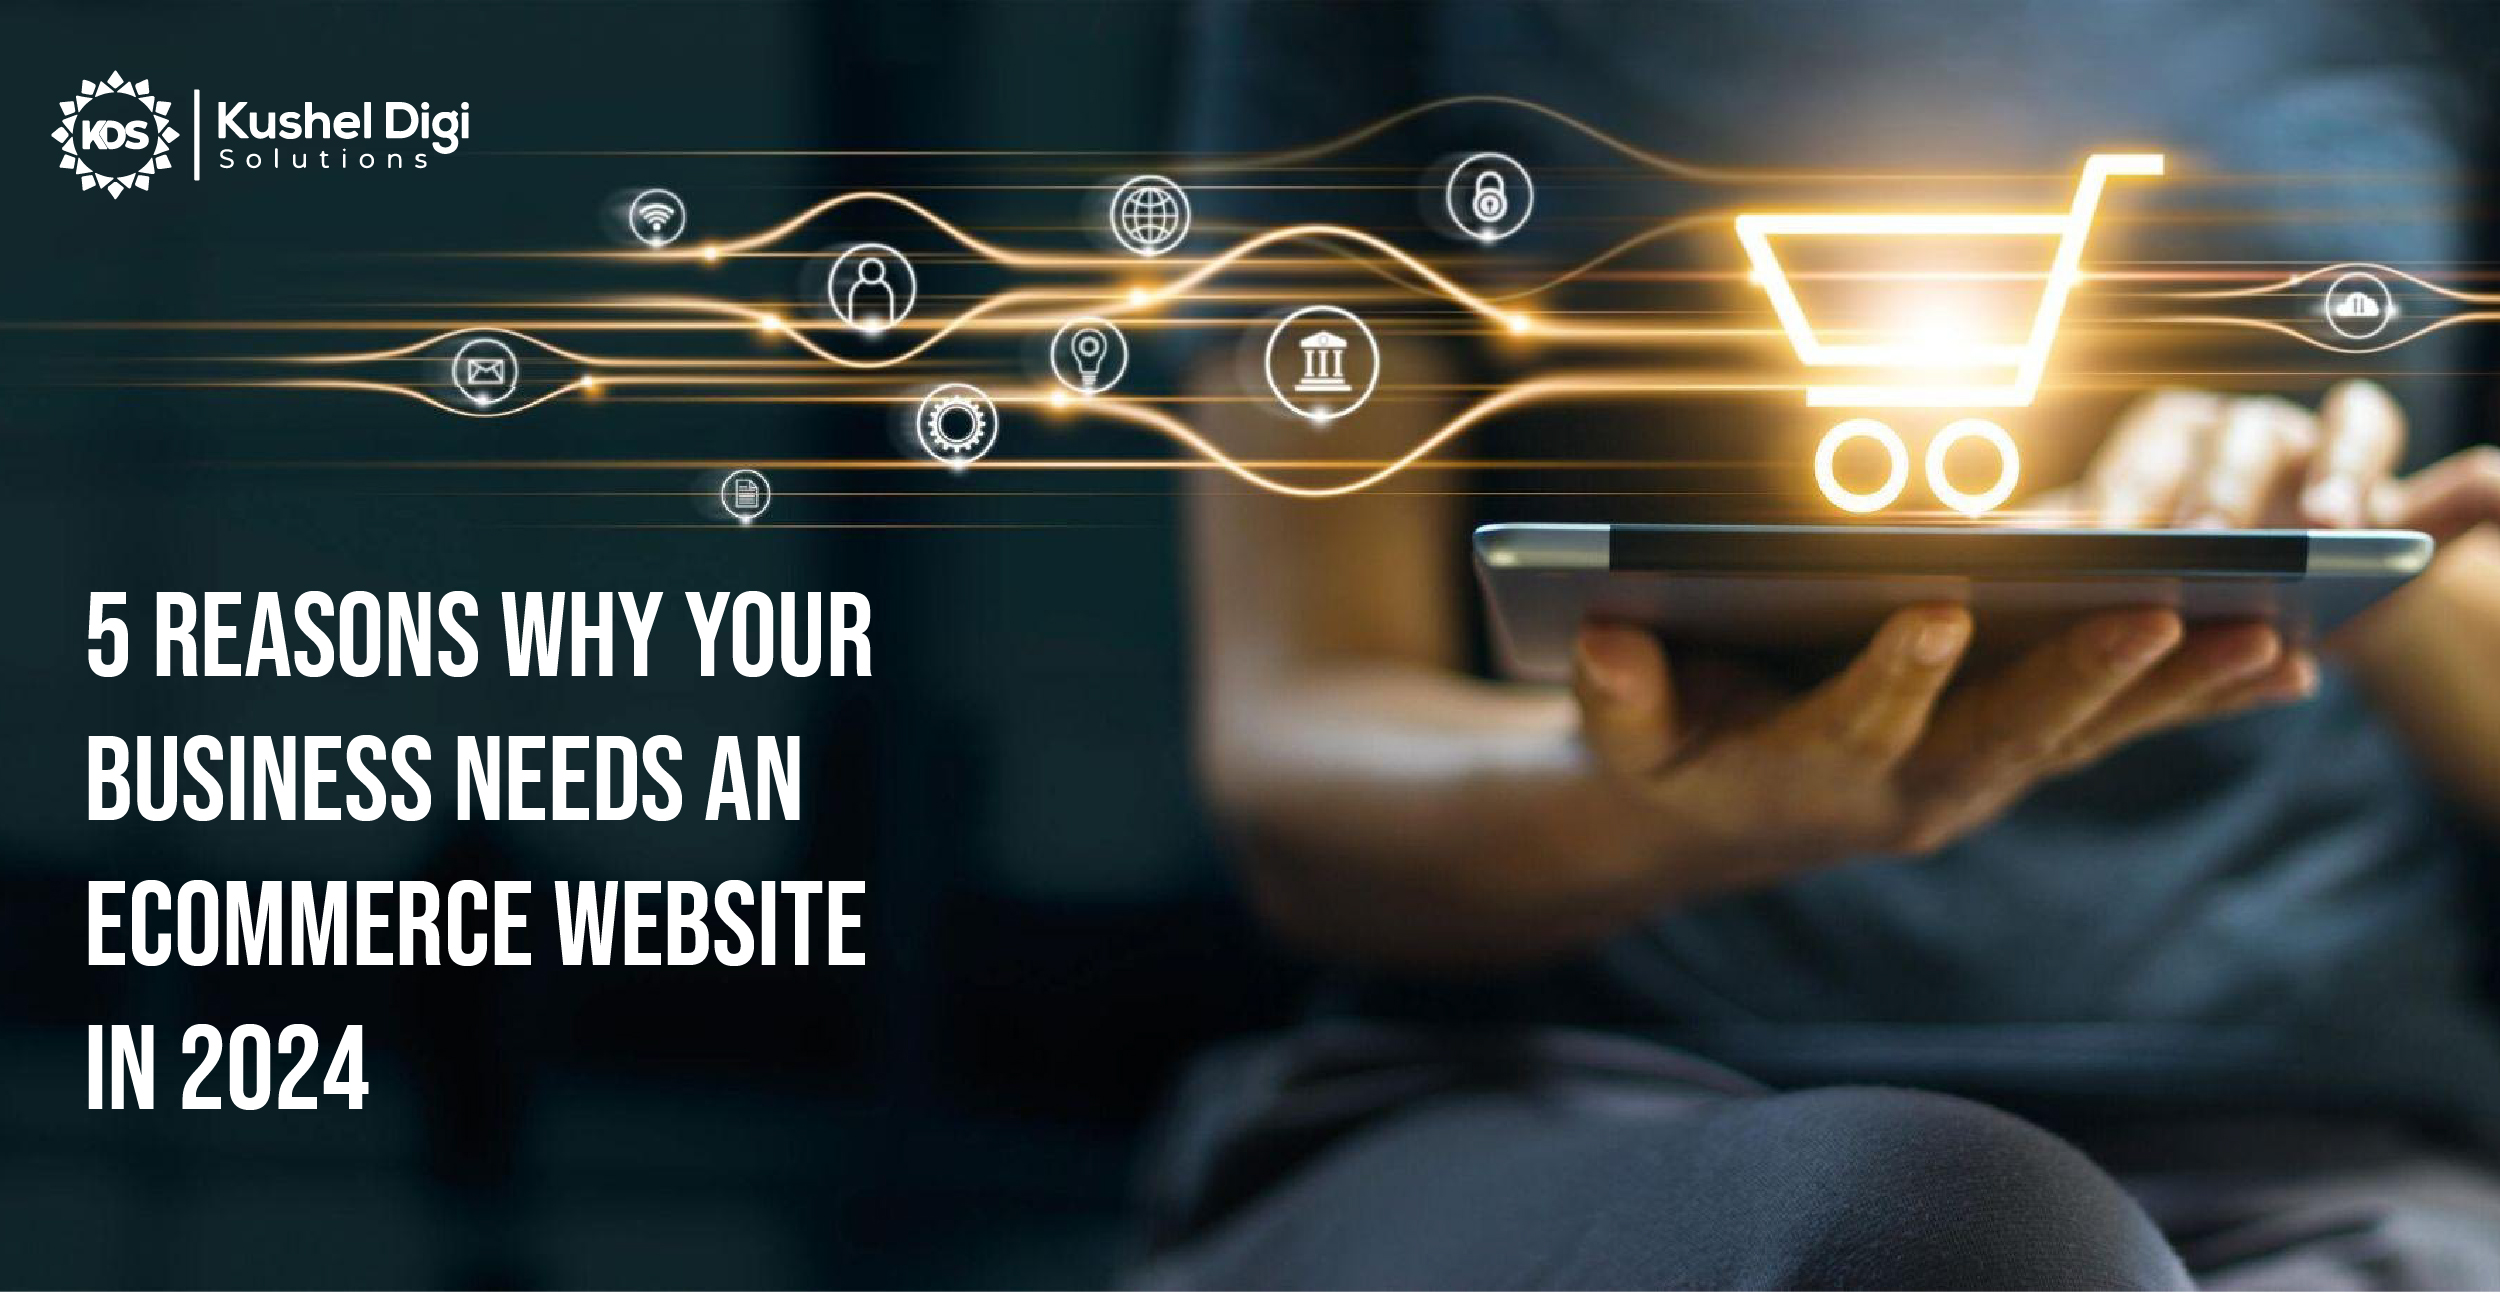 REASONS WHY YOUR BUSINESS STILL NEEDS A WEBSITE IN 2024